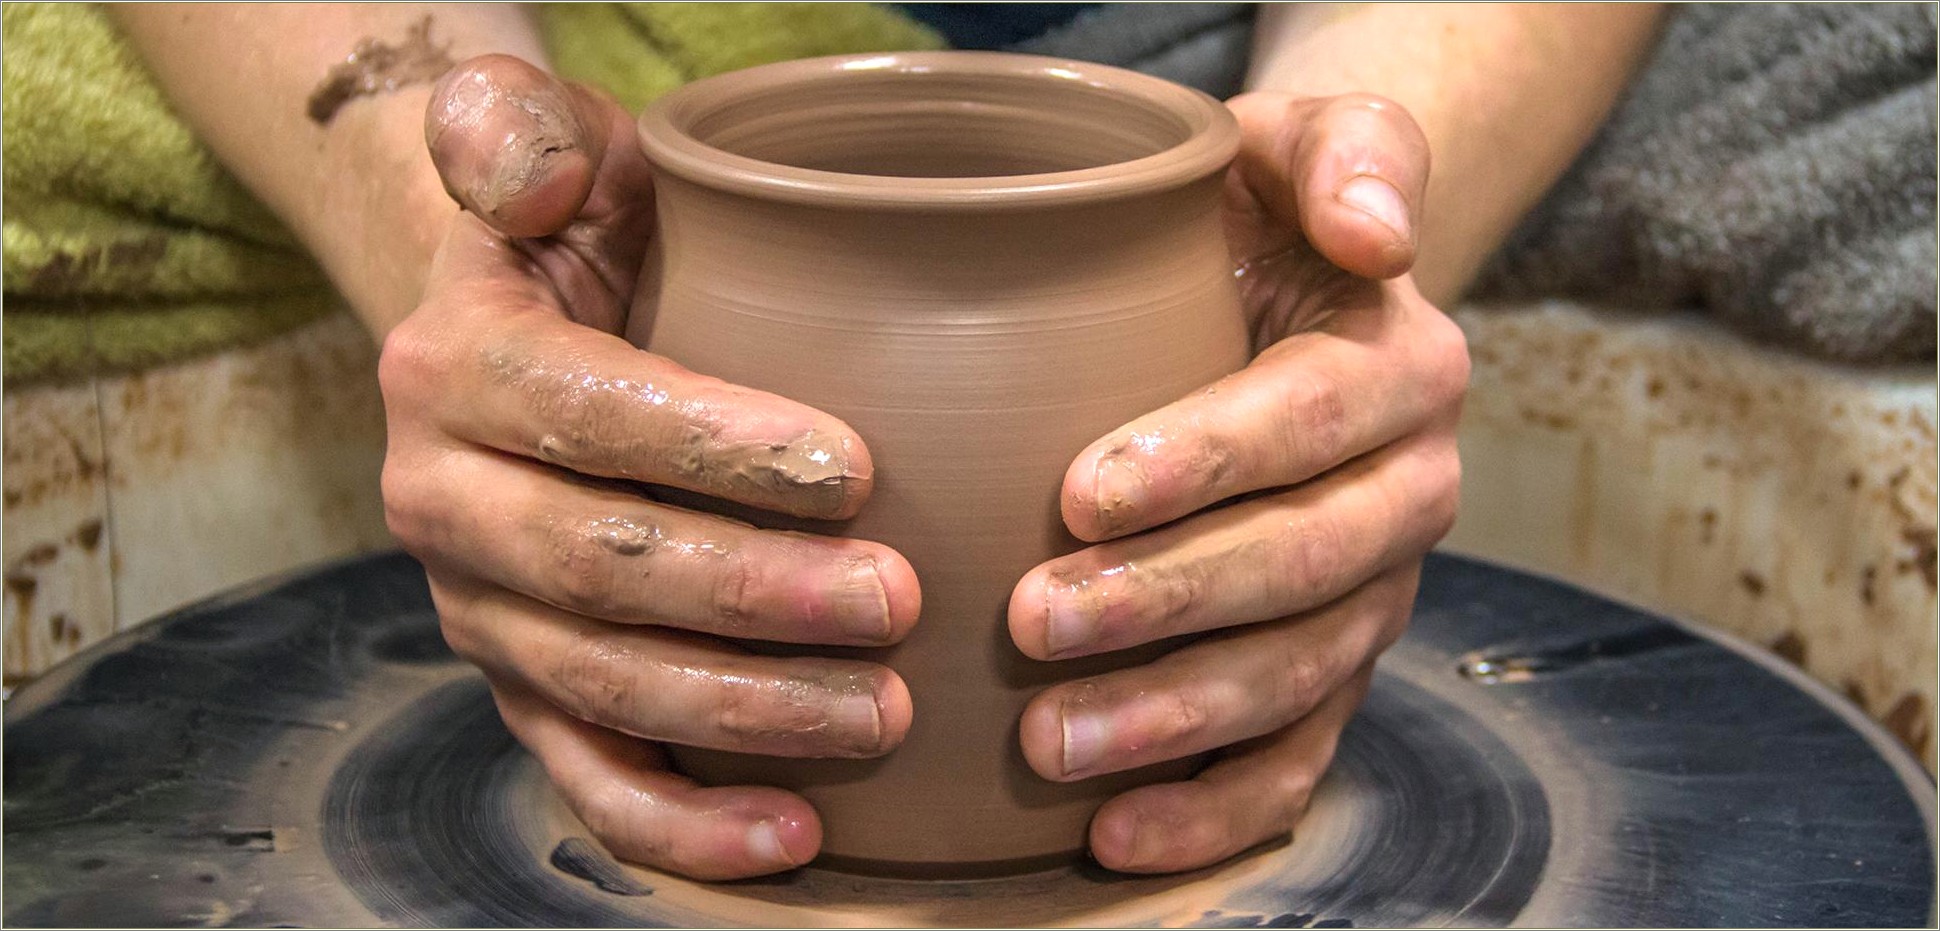 Resume Skills For Ware Person At Pottery